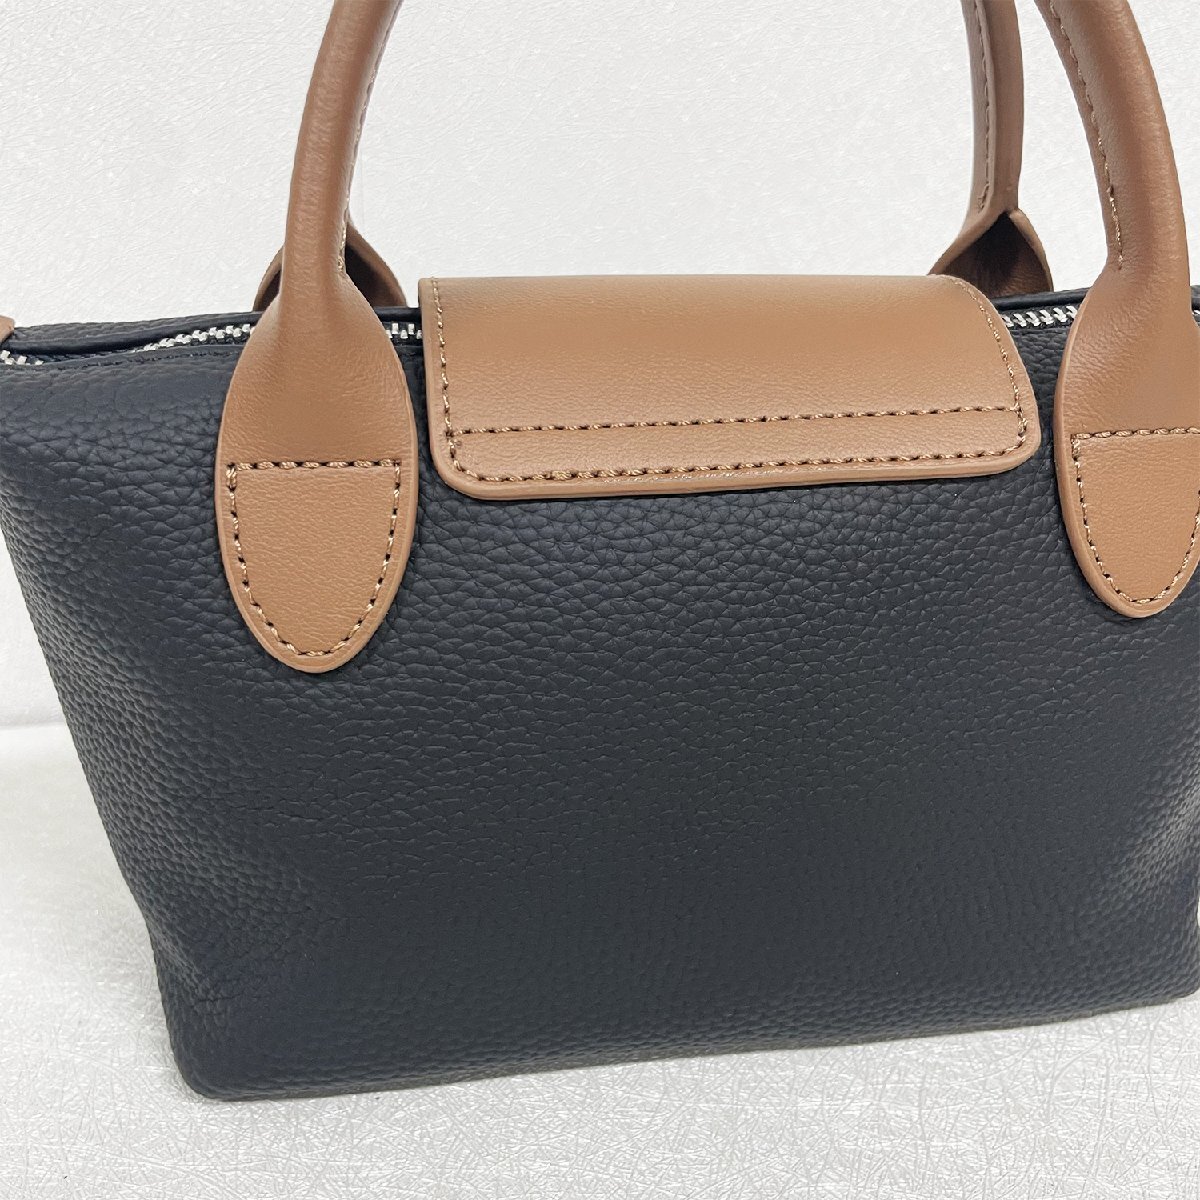 .. Europe made * regular price 12 ten thousand * BVLGARY a departure *RISELIN shoulder bag highest grade cow leather leather original leather beautiful on goods handbag 2way lady's 